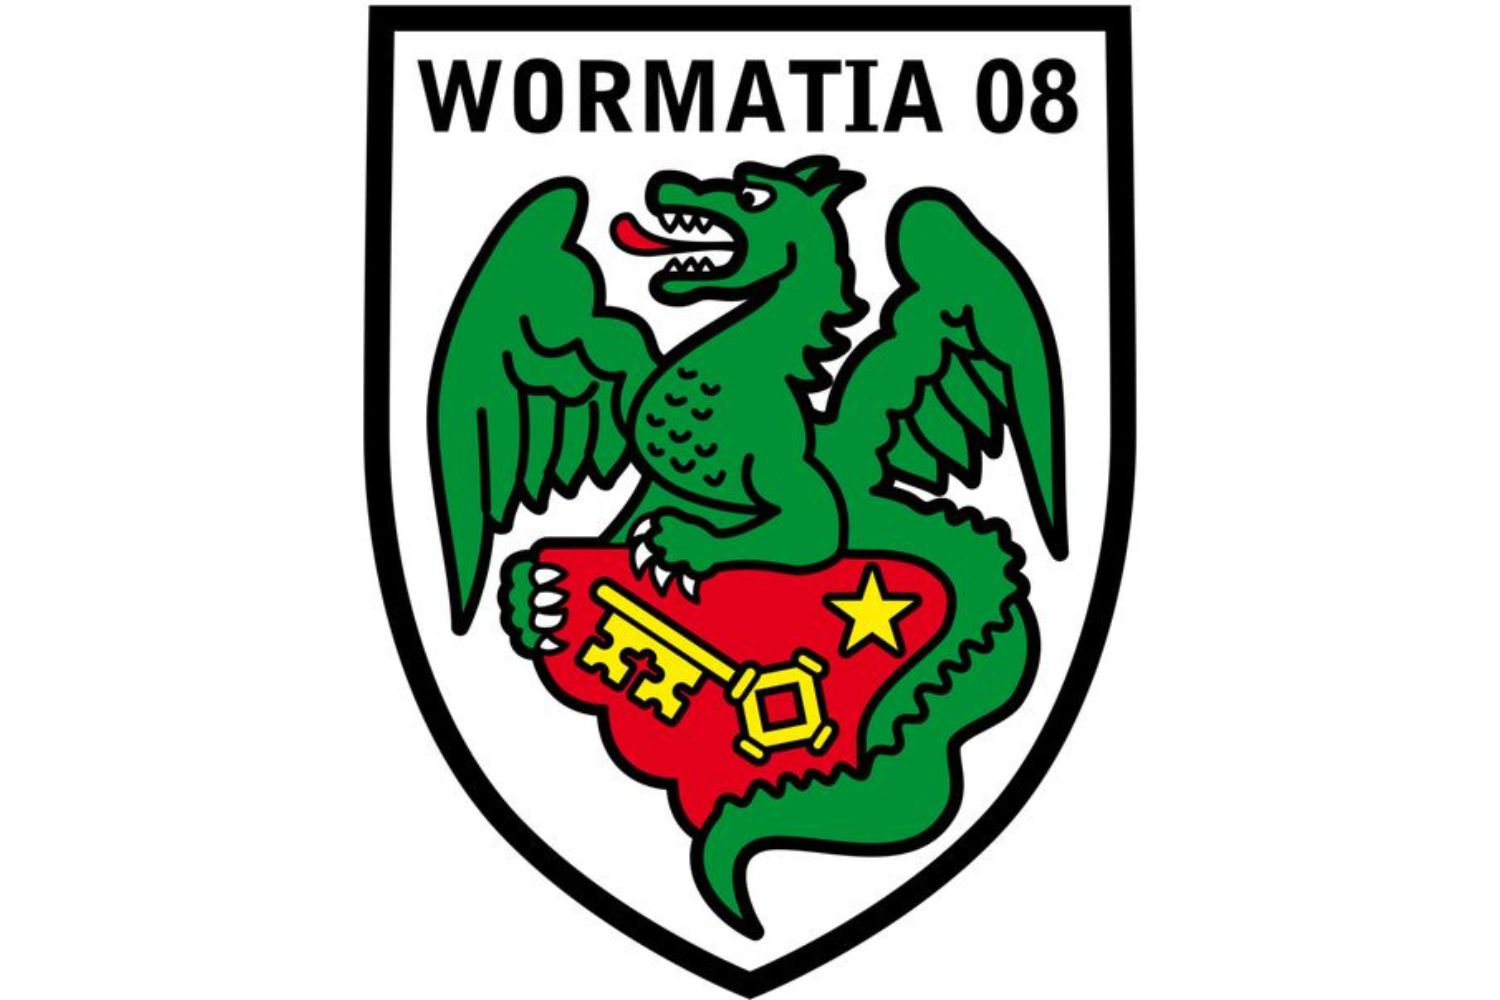 vfr-wormatia-08-worms-13-football-club-facts